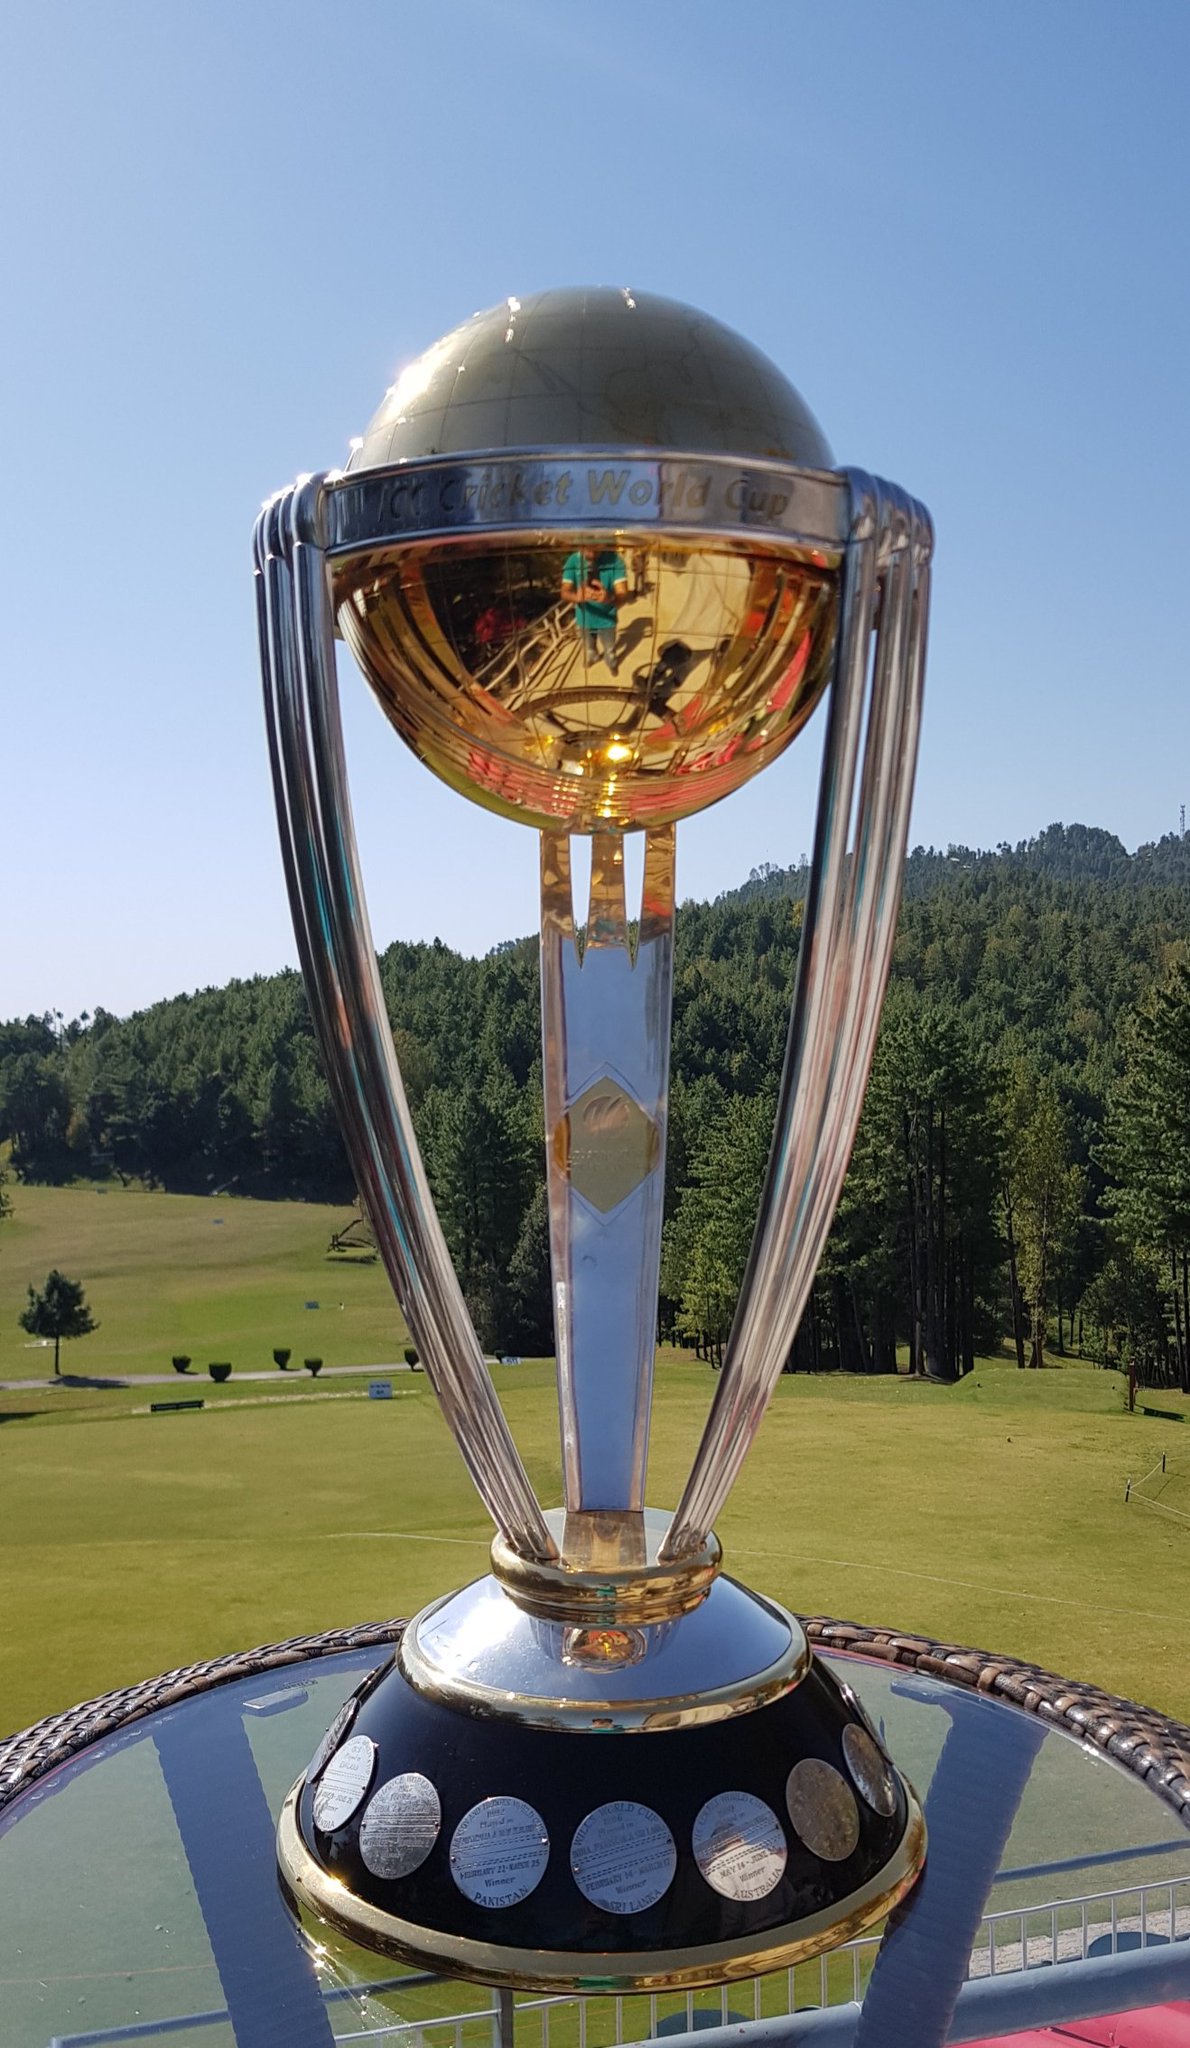 News99 on Twitter "ICC's Cricket World Cup 2019 Trophy